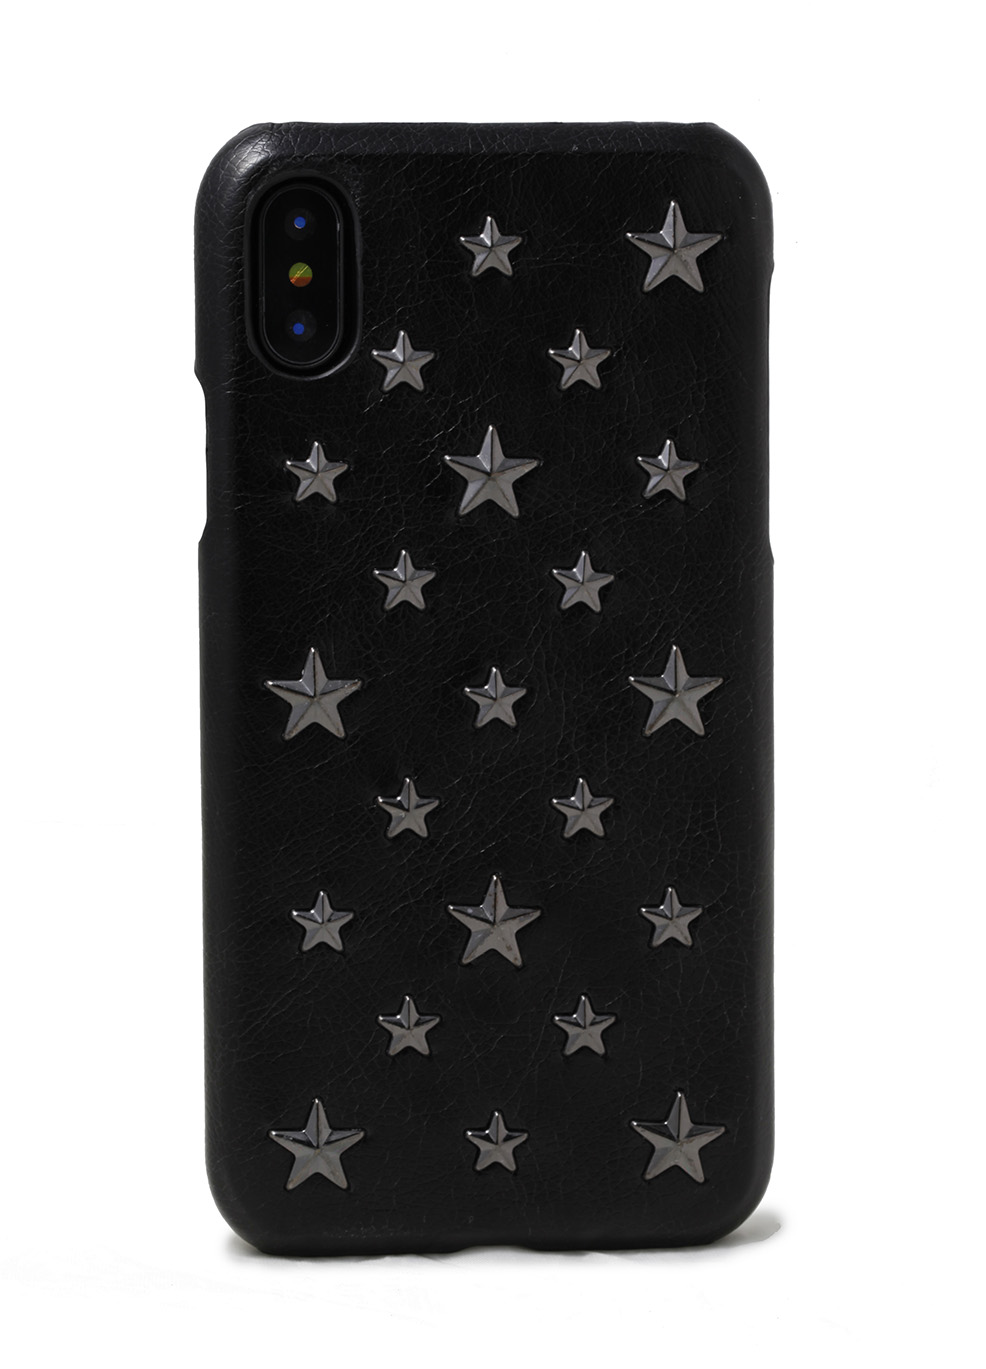 Star Studs 805 For iPhone X Case